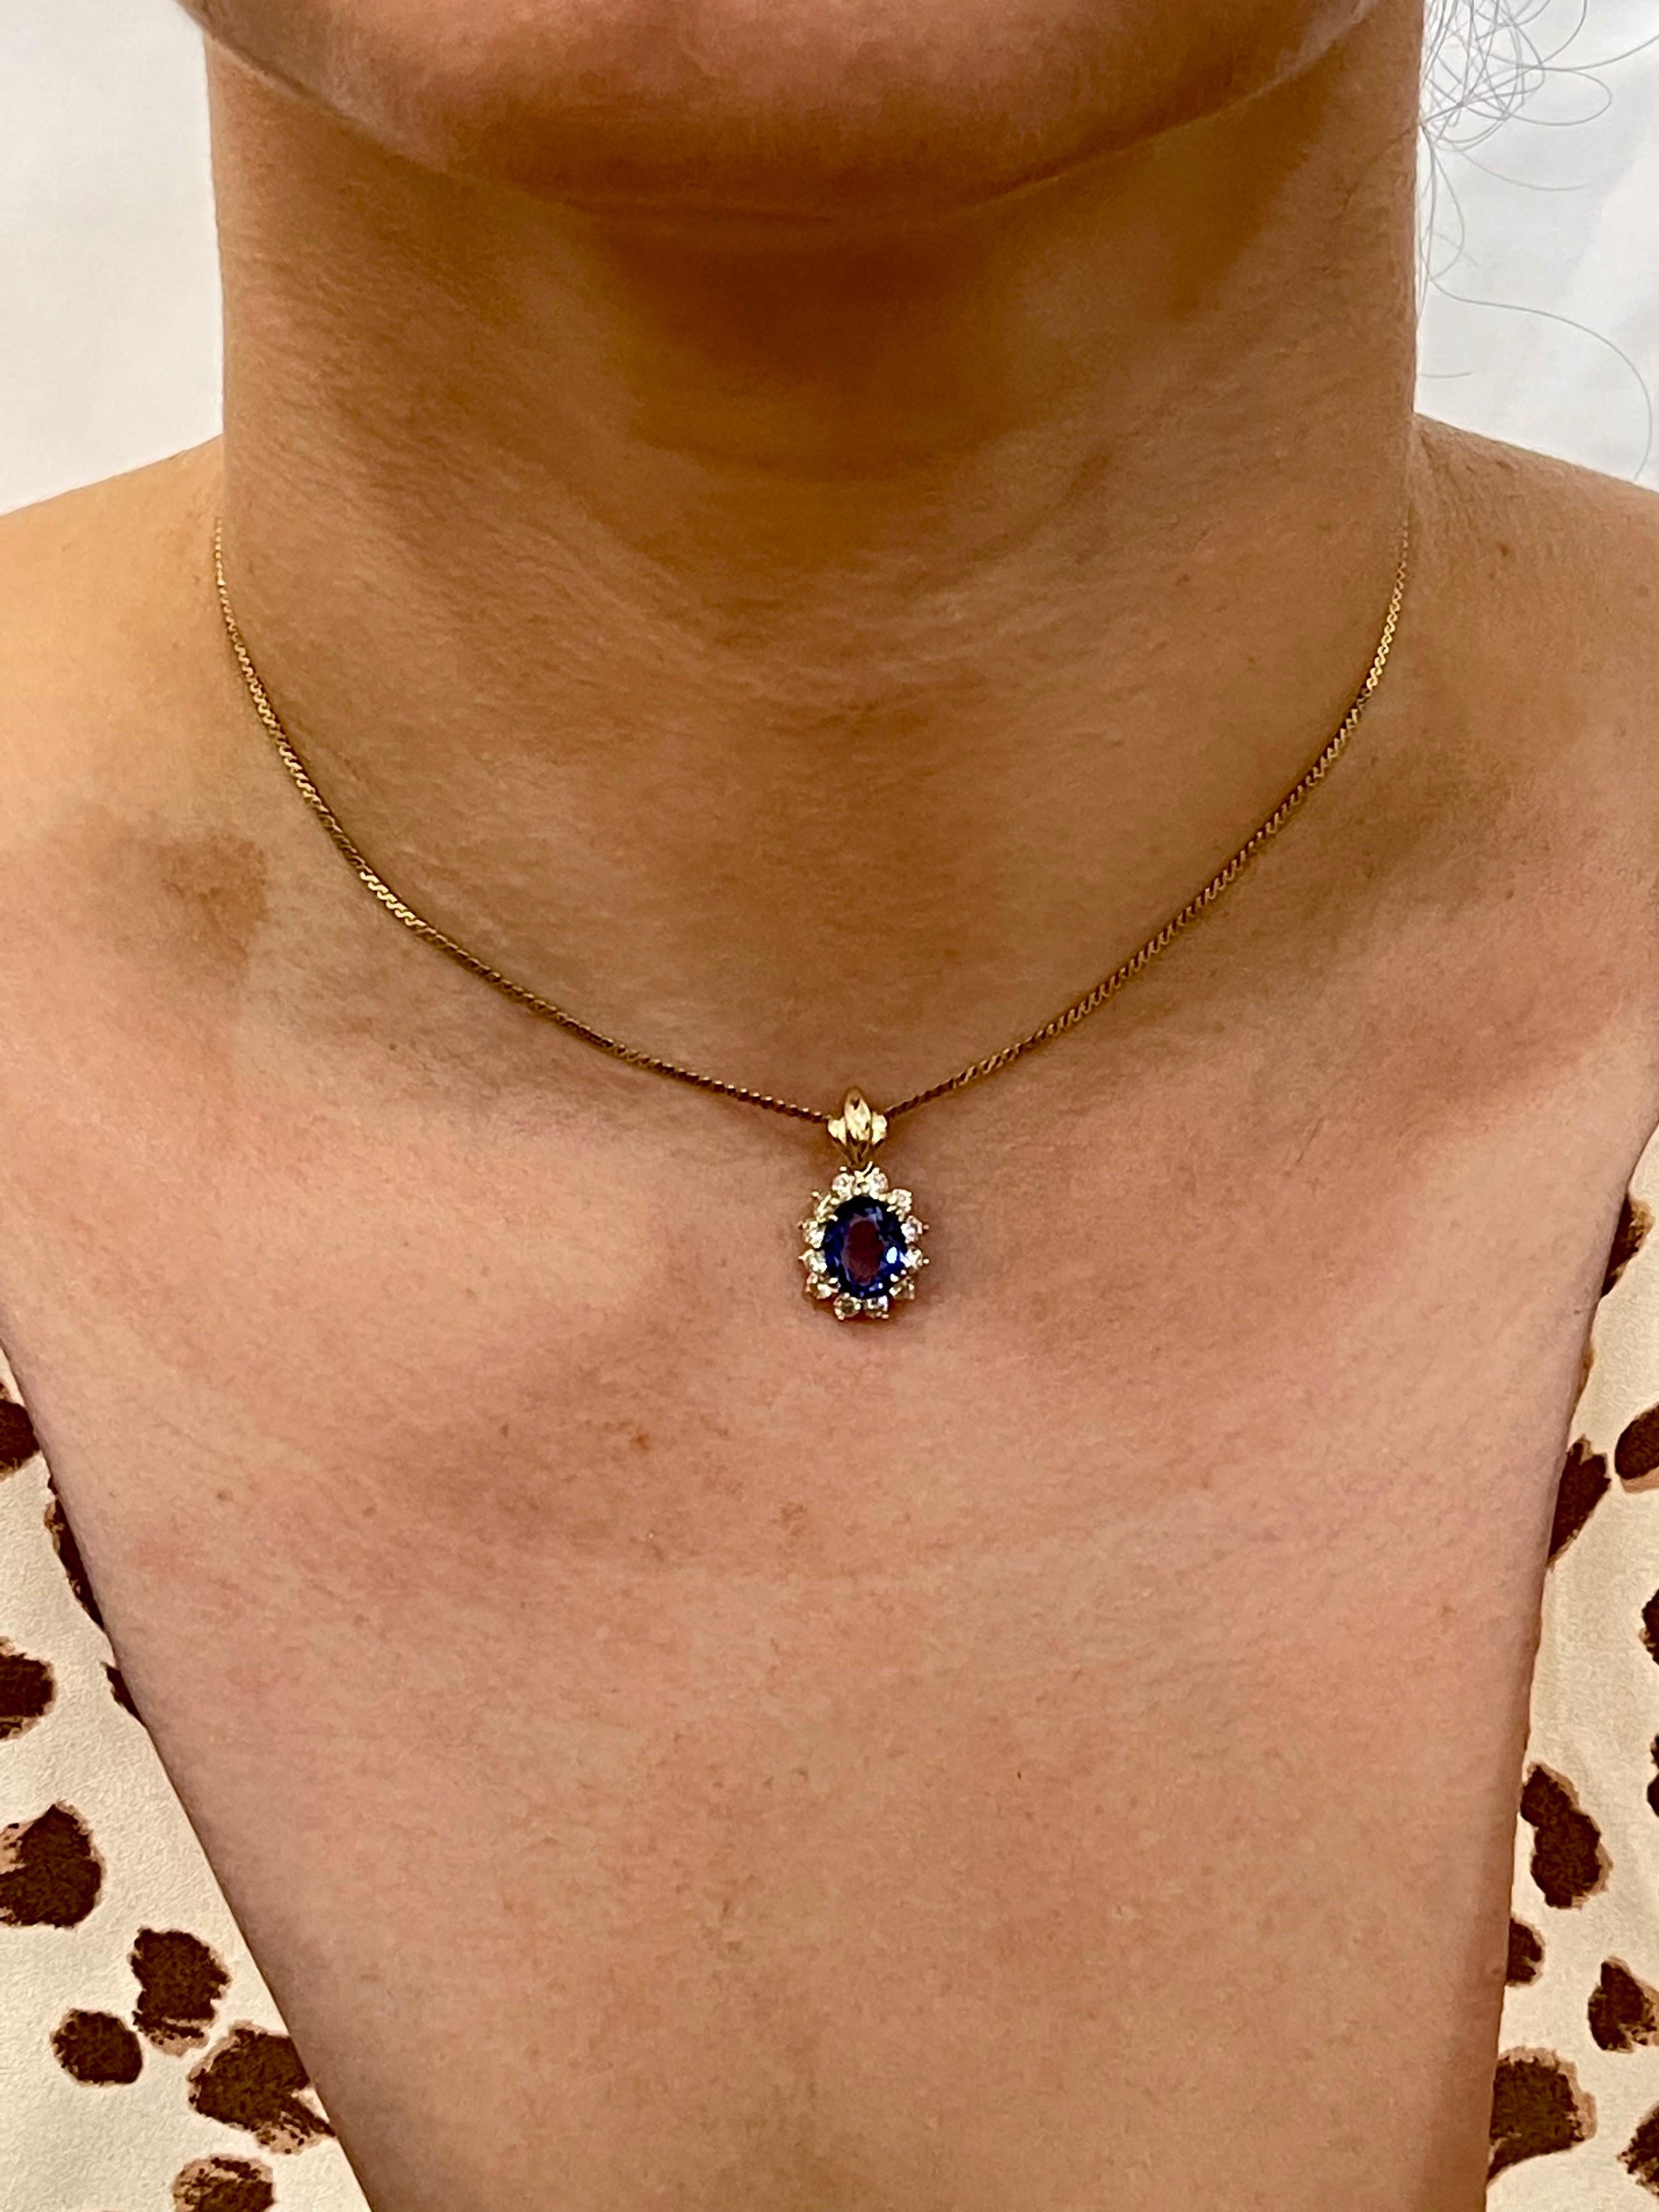 3 Carat Tanzanite and 1 Ct Diamond Pendant or Necklace 14 Karat Yellow Gold For Sale 7